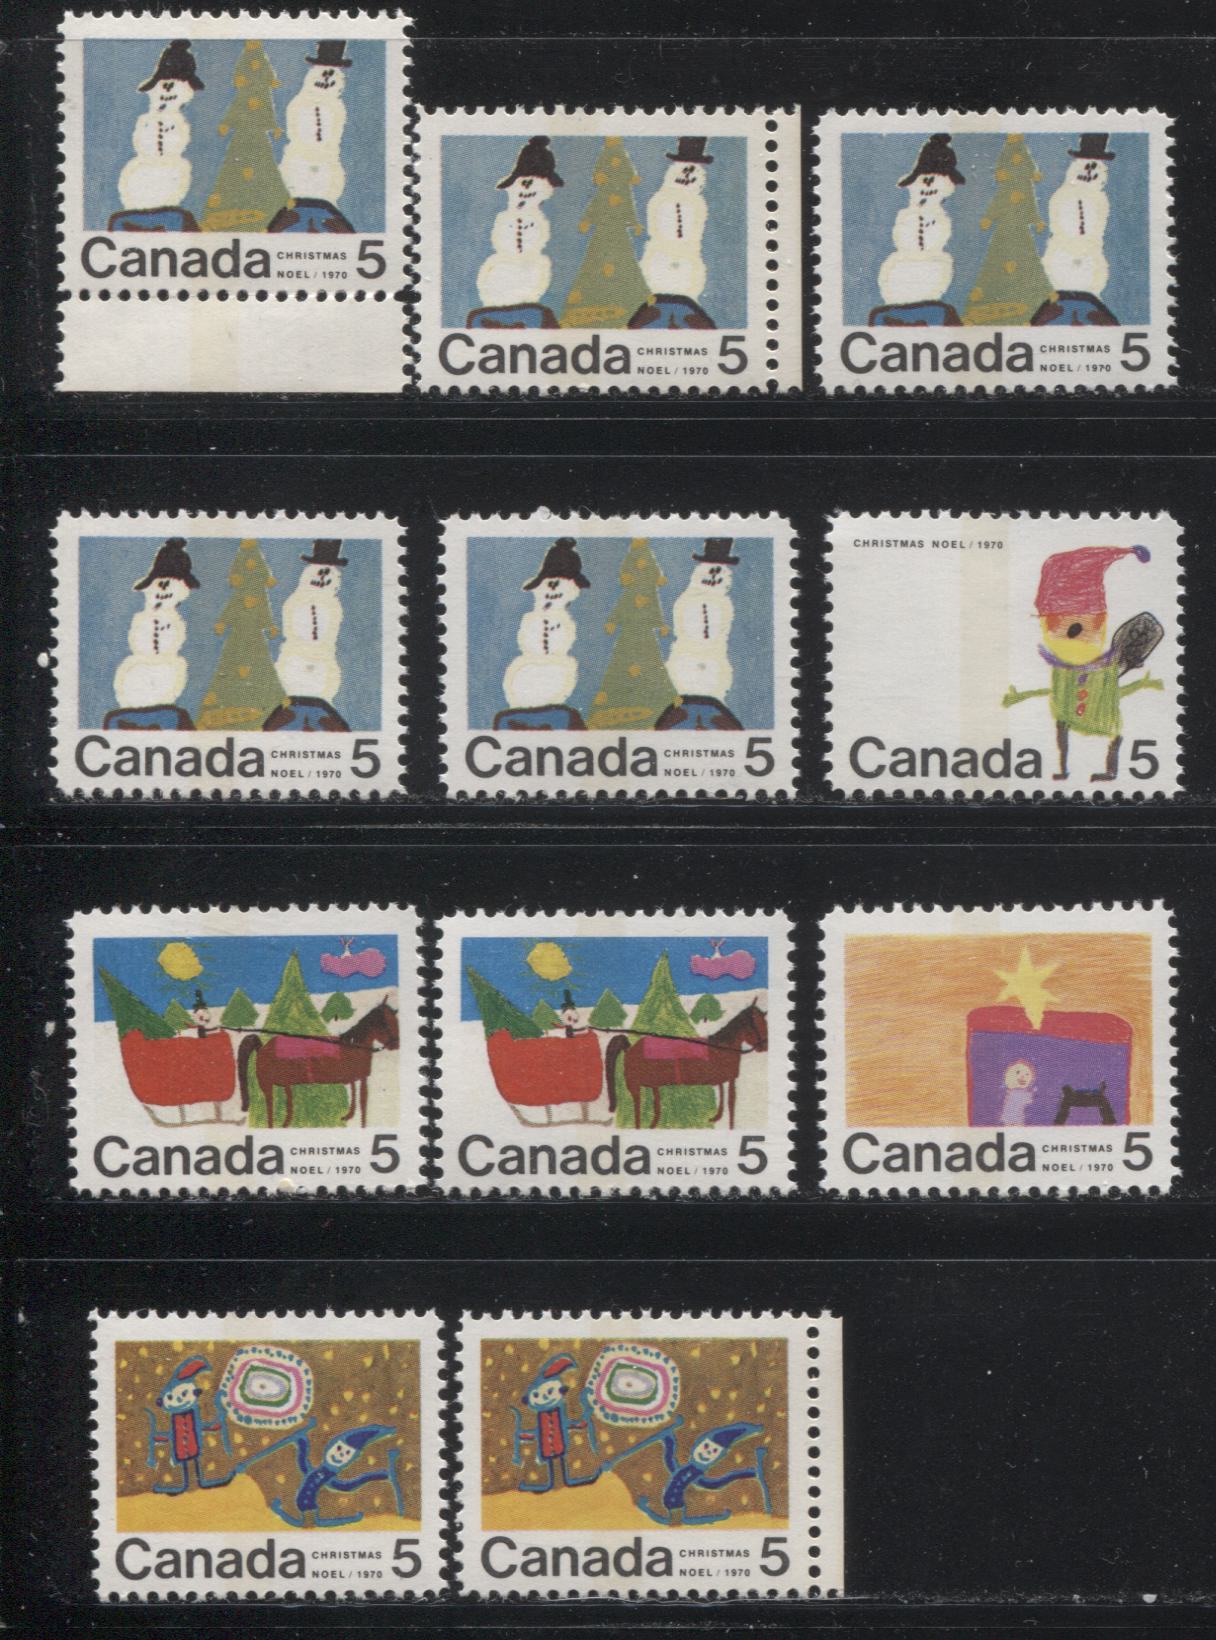 Lot 146 Canada #519p-523p 5c Multicoloured 1970 Christmas Issue, A Complete Set of 11 Winnipeg Tagged Constant Plate Varieties From Combination 4, Ribbed HB11 Paper, Perf. 11.95 x 11.9